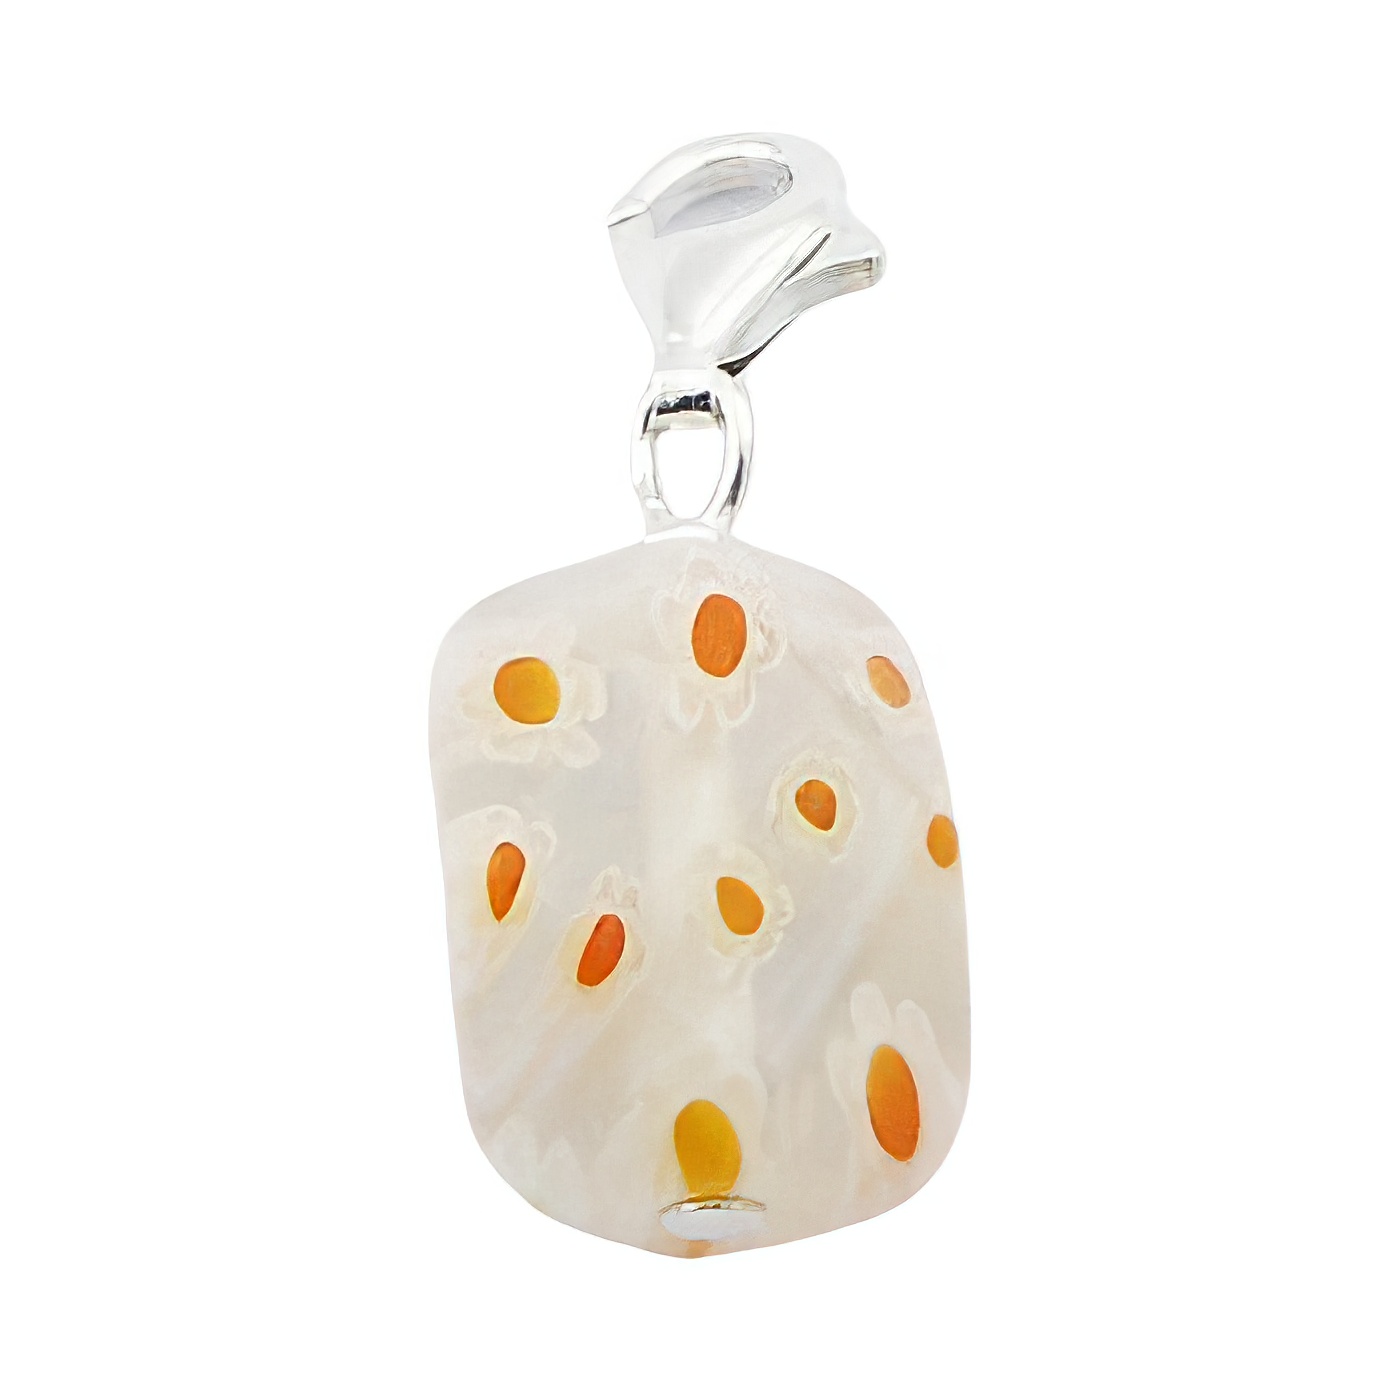 Cuboid murano glass sterling silver charm 